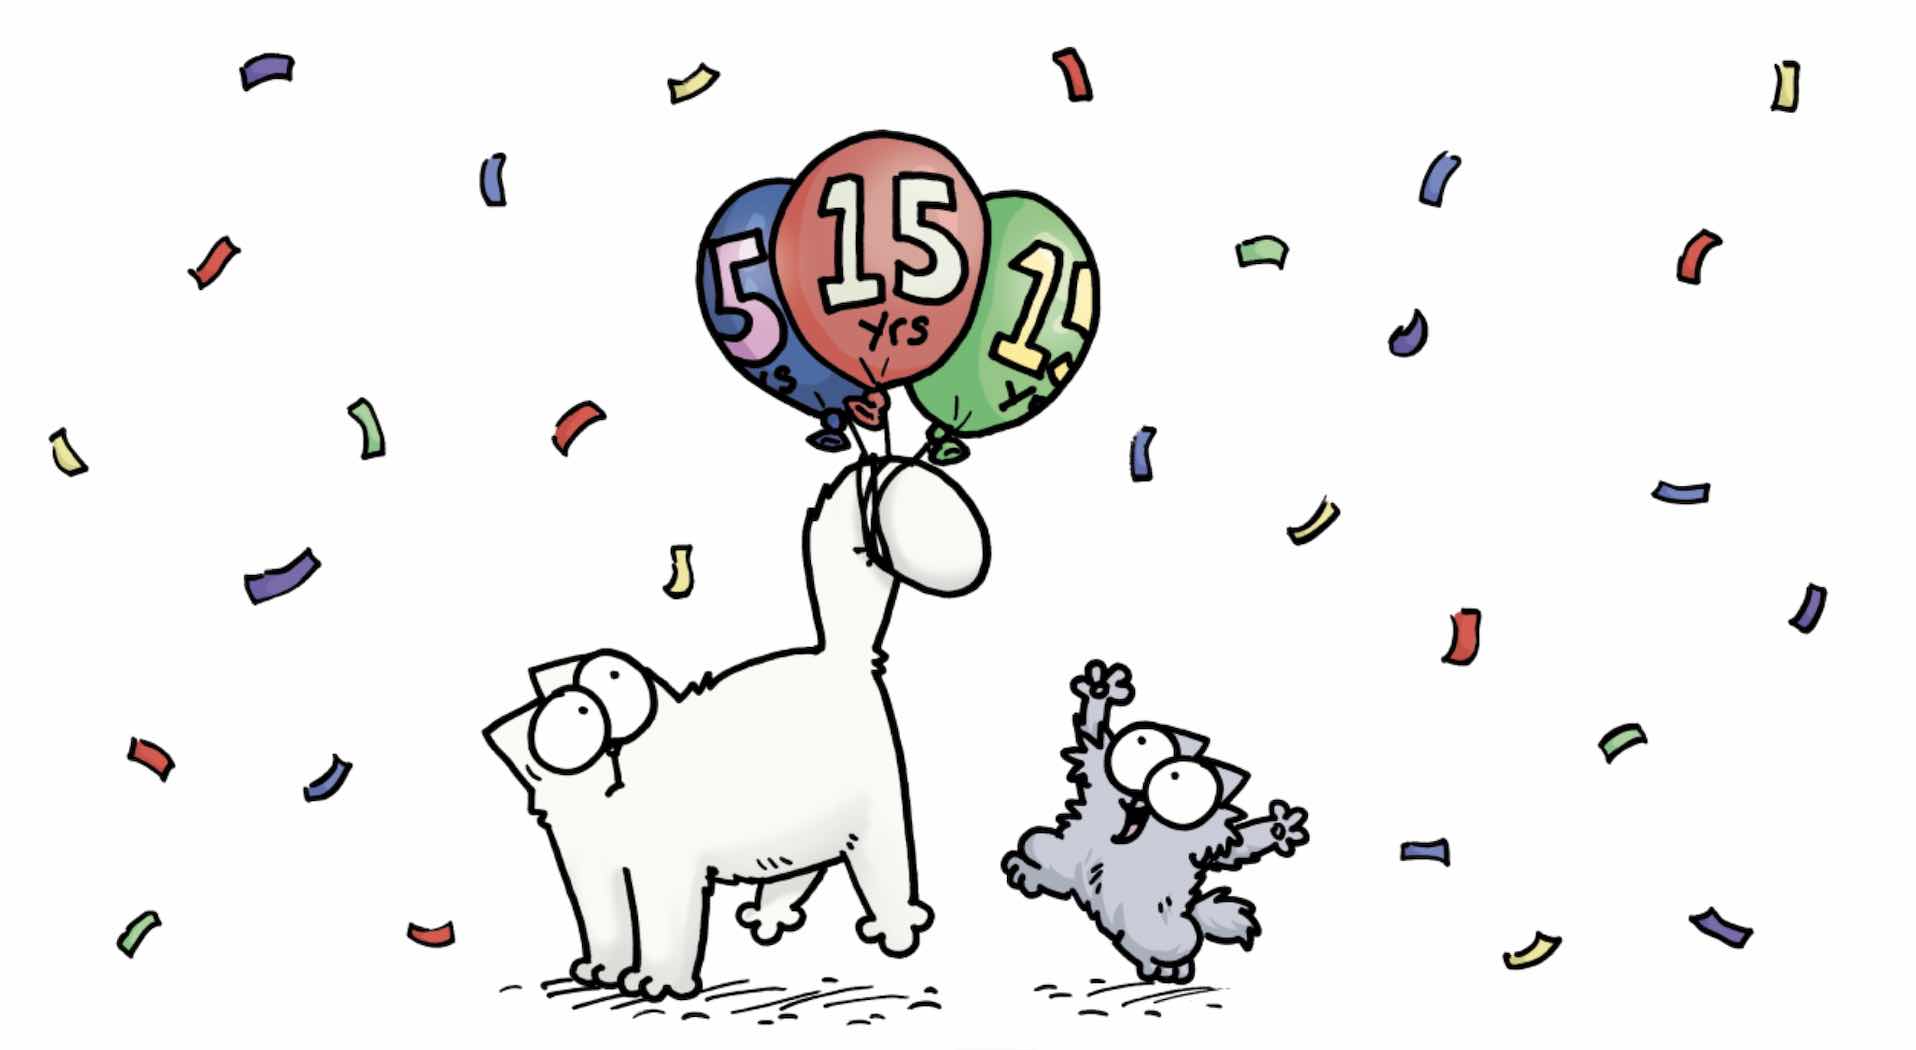 Simon's Cat at 15 years, films released in colour - Televisual